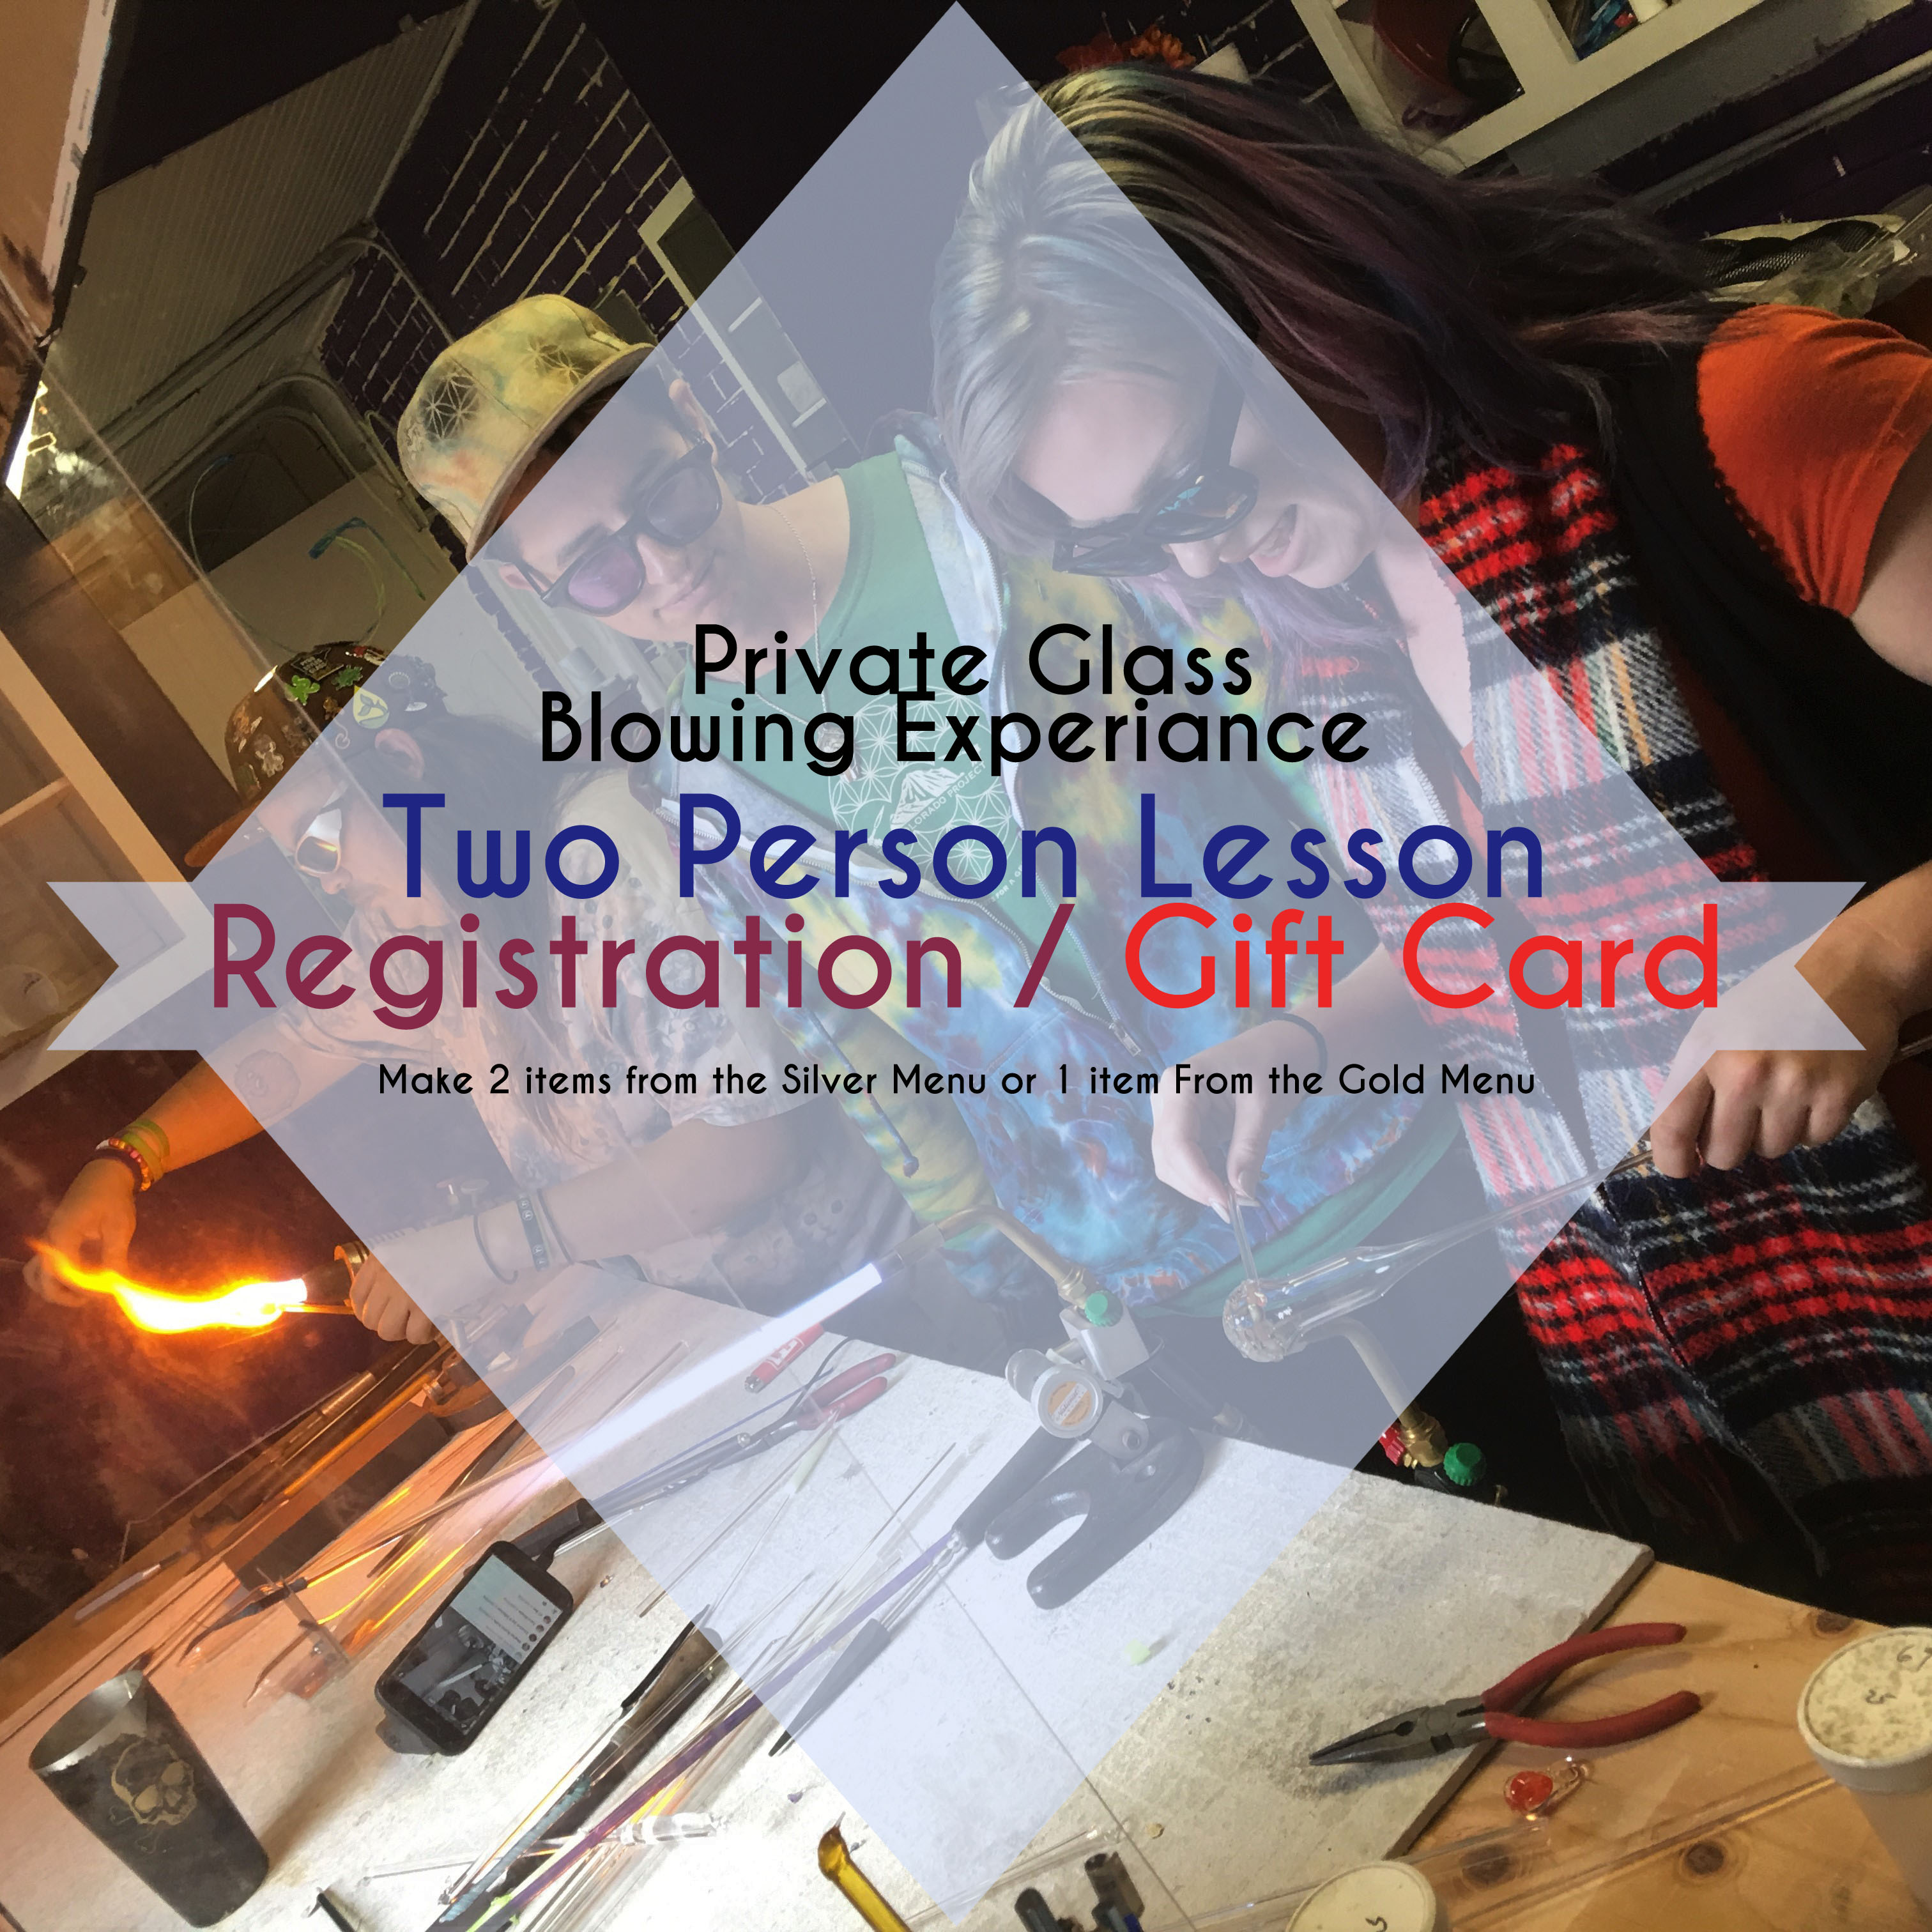 Glass blowing classes available!